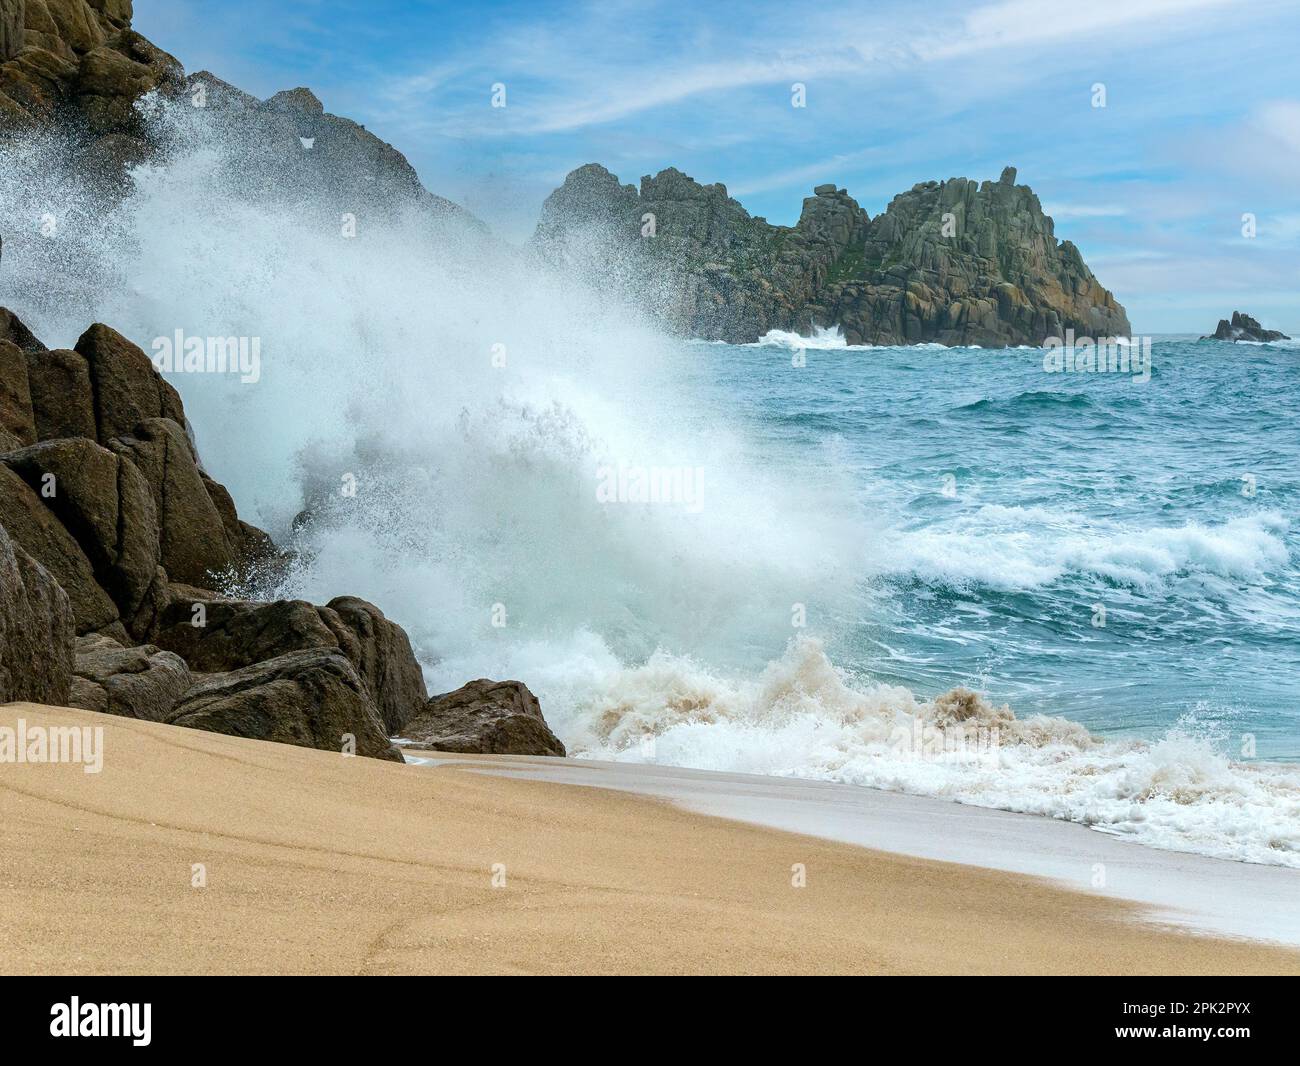 Sea, surf, waves and spray with Logan rock headland in the distance, Porthcurno beach, Cornwall, England, UK Stock Photo